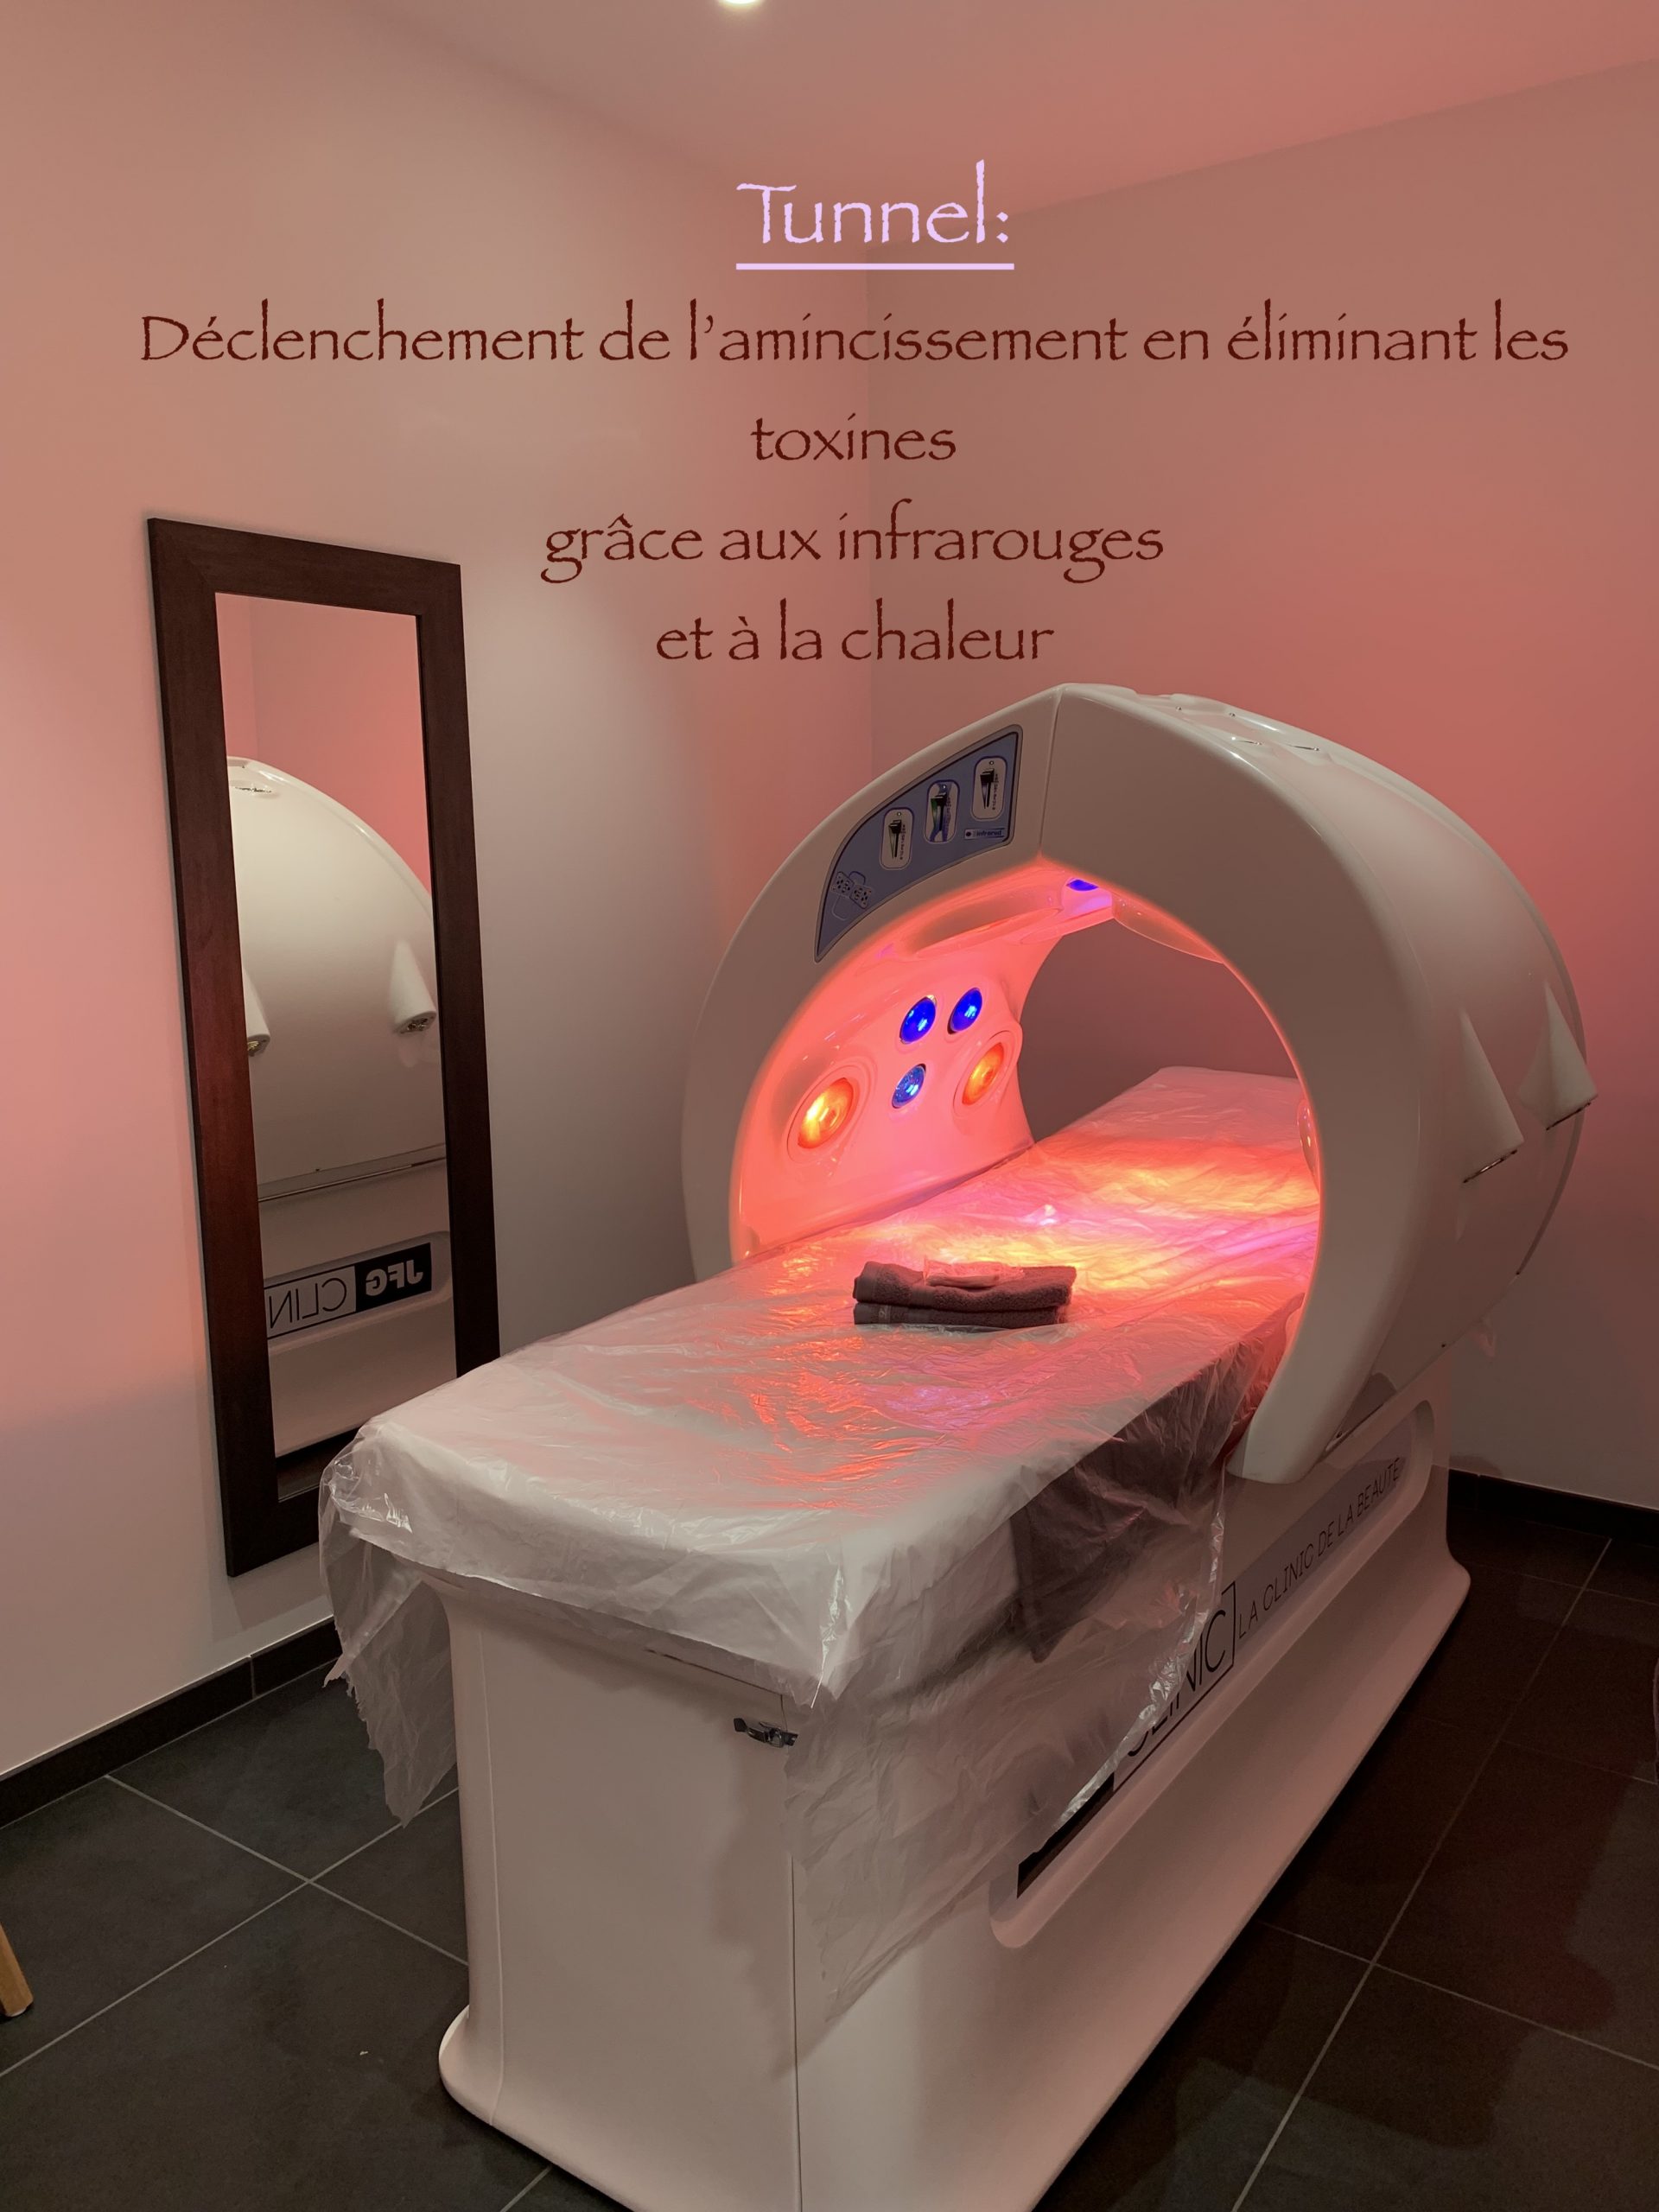 Le Tunnel JFG Clinic Antibes